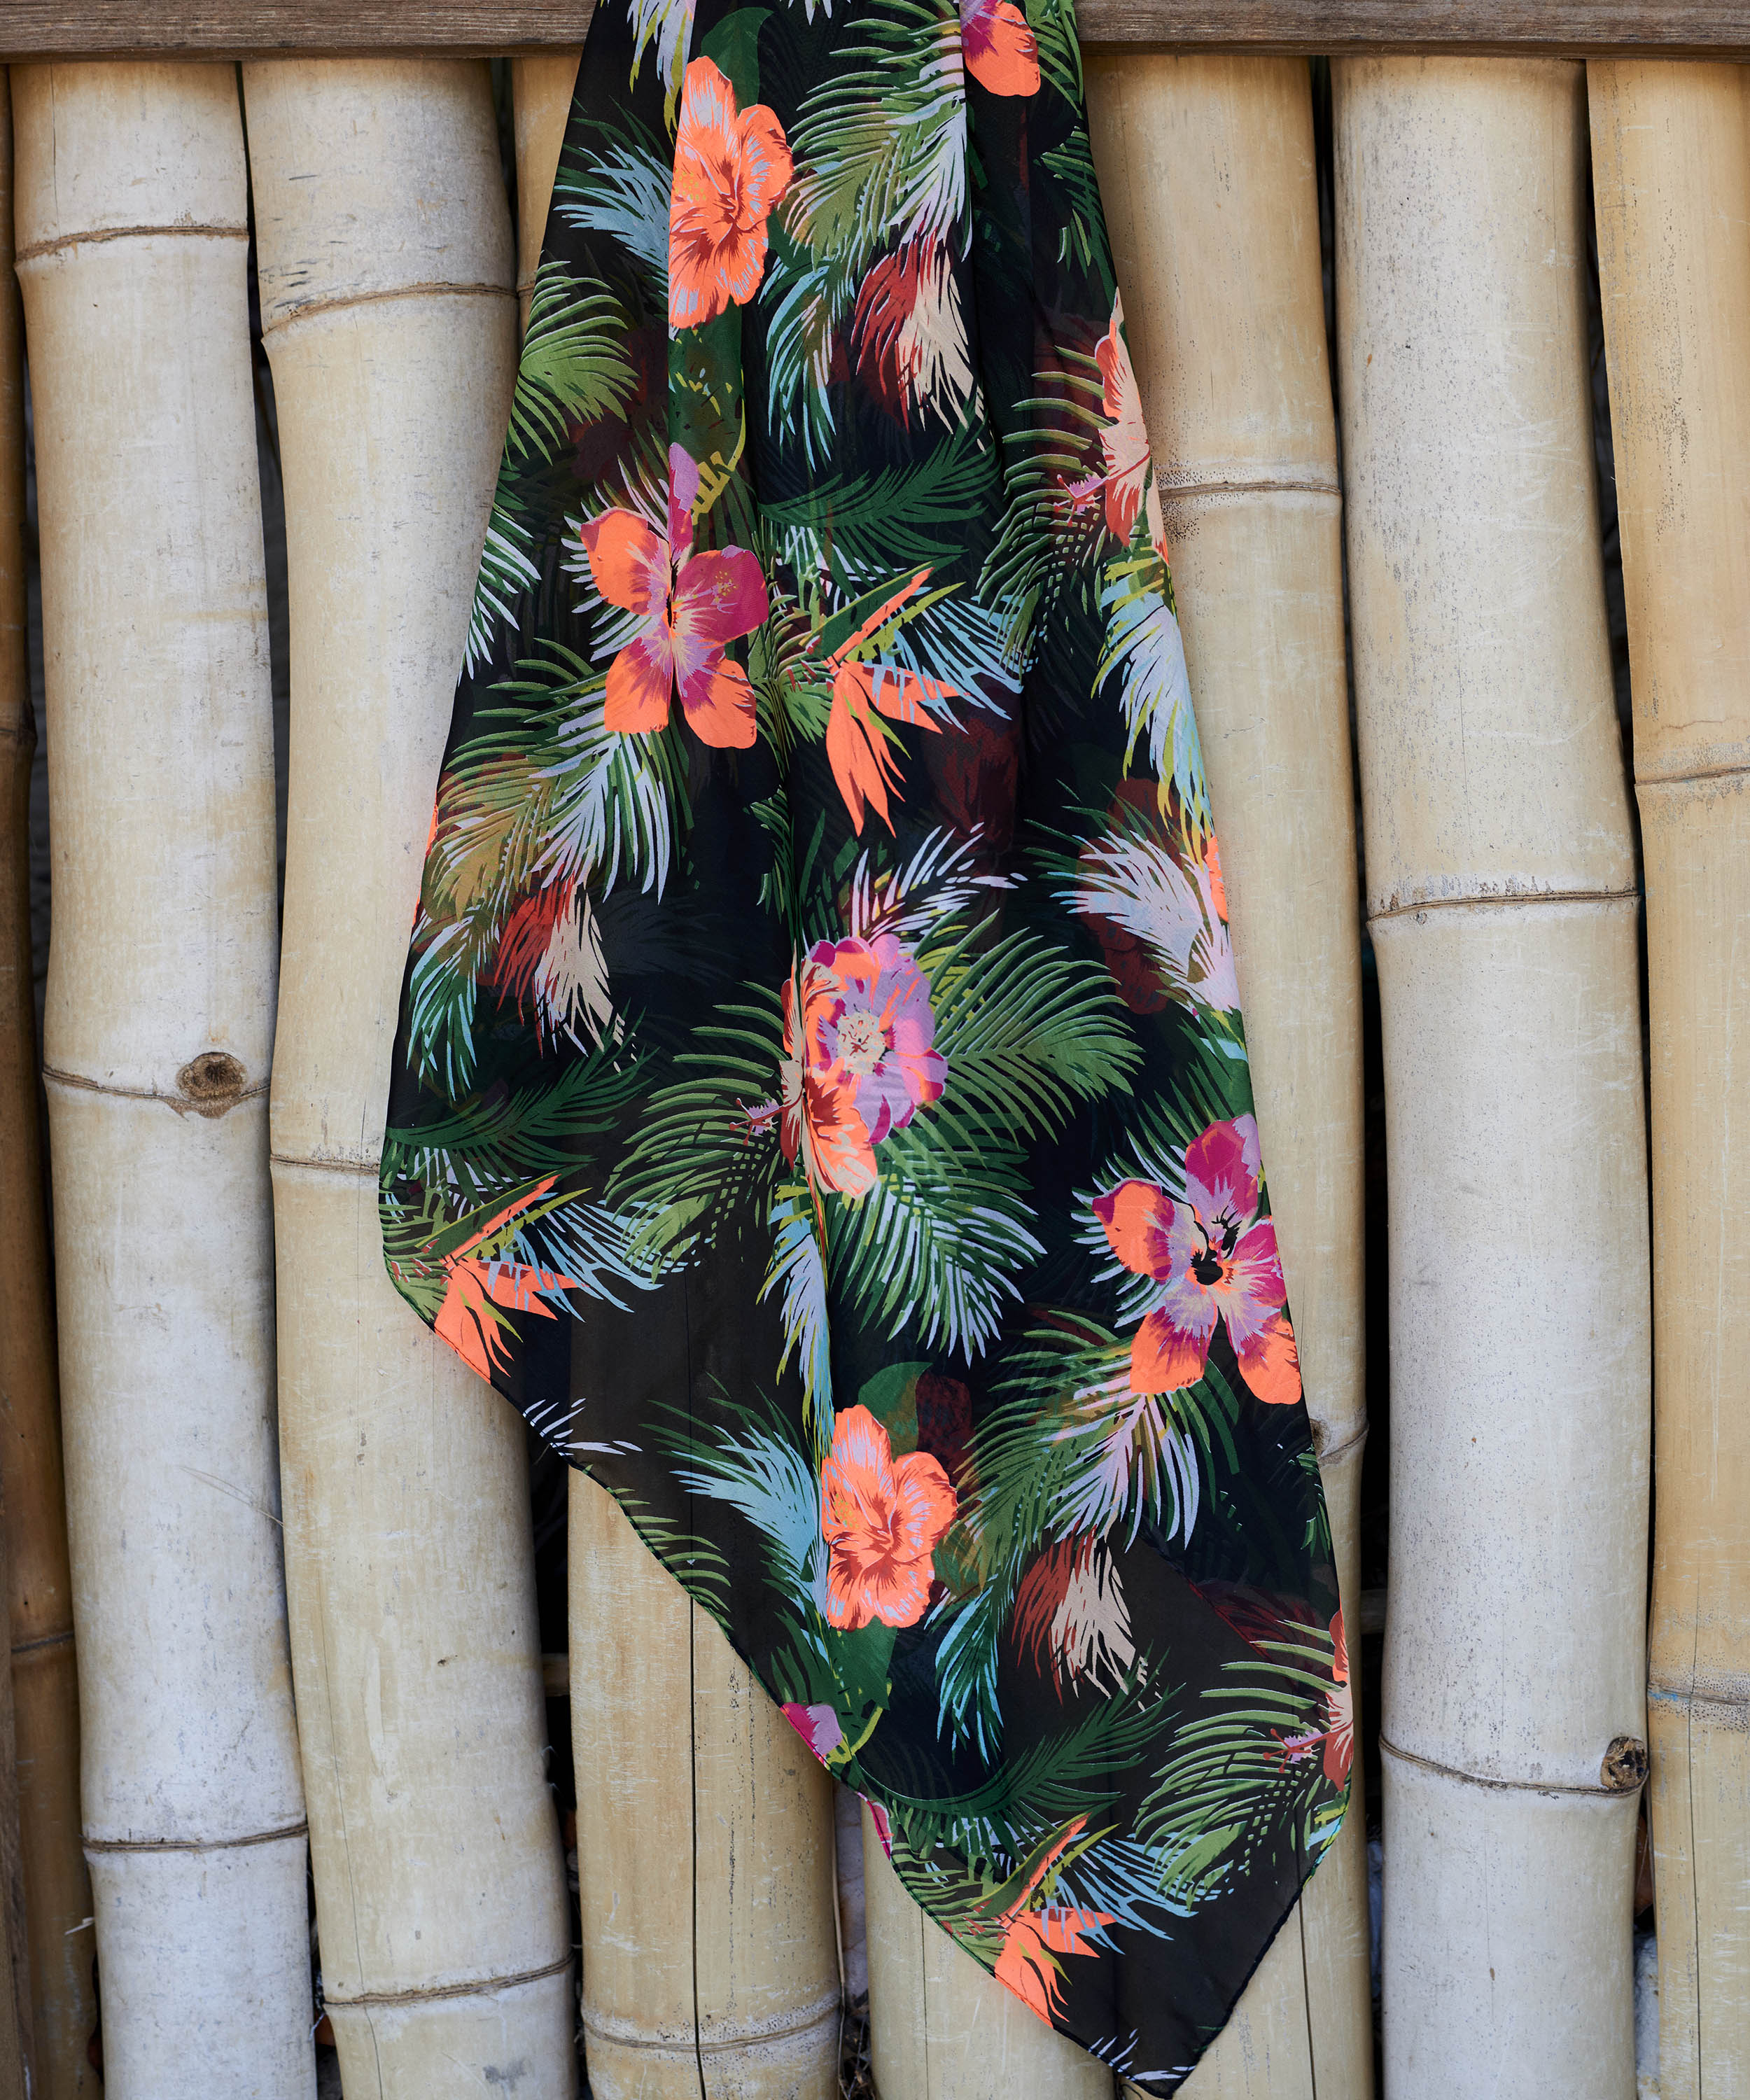 nep Nauwkeurig Verder Hunkemöller on Twitter: "You can use this tropical pareo as a scarf, a  skirt, a dress over your bikini and much more! > https://t.co/4j8FGjHH7Z # hunkemöller #pareo https://t.co/9NQJ4jhAVs" / Twitter